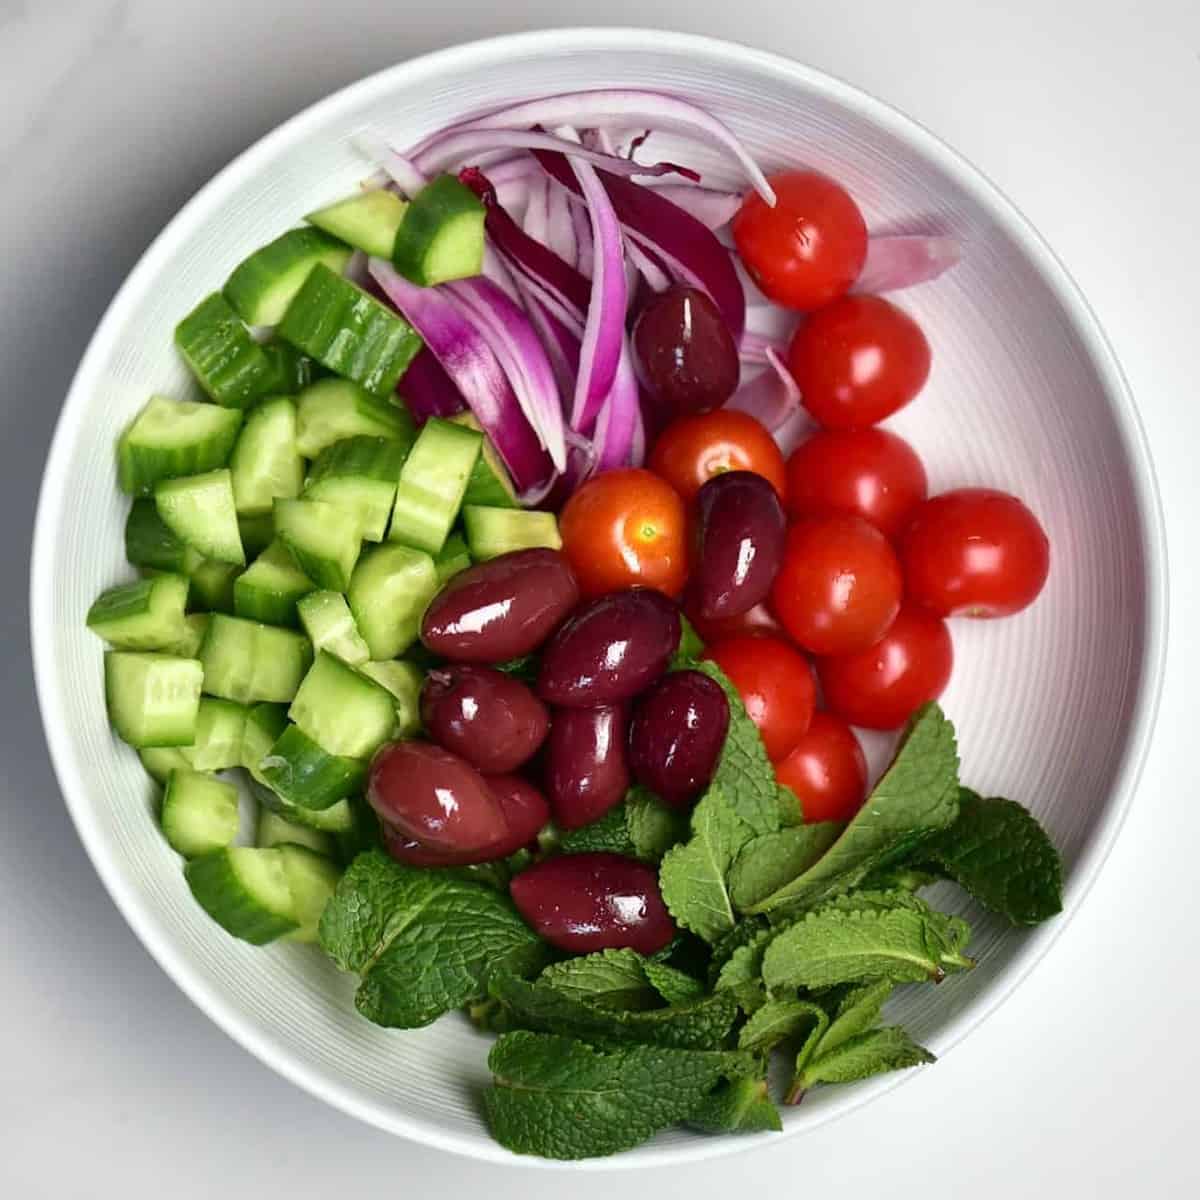 tomato, olives, red onion, cucumber and mint in a bowl